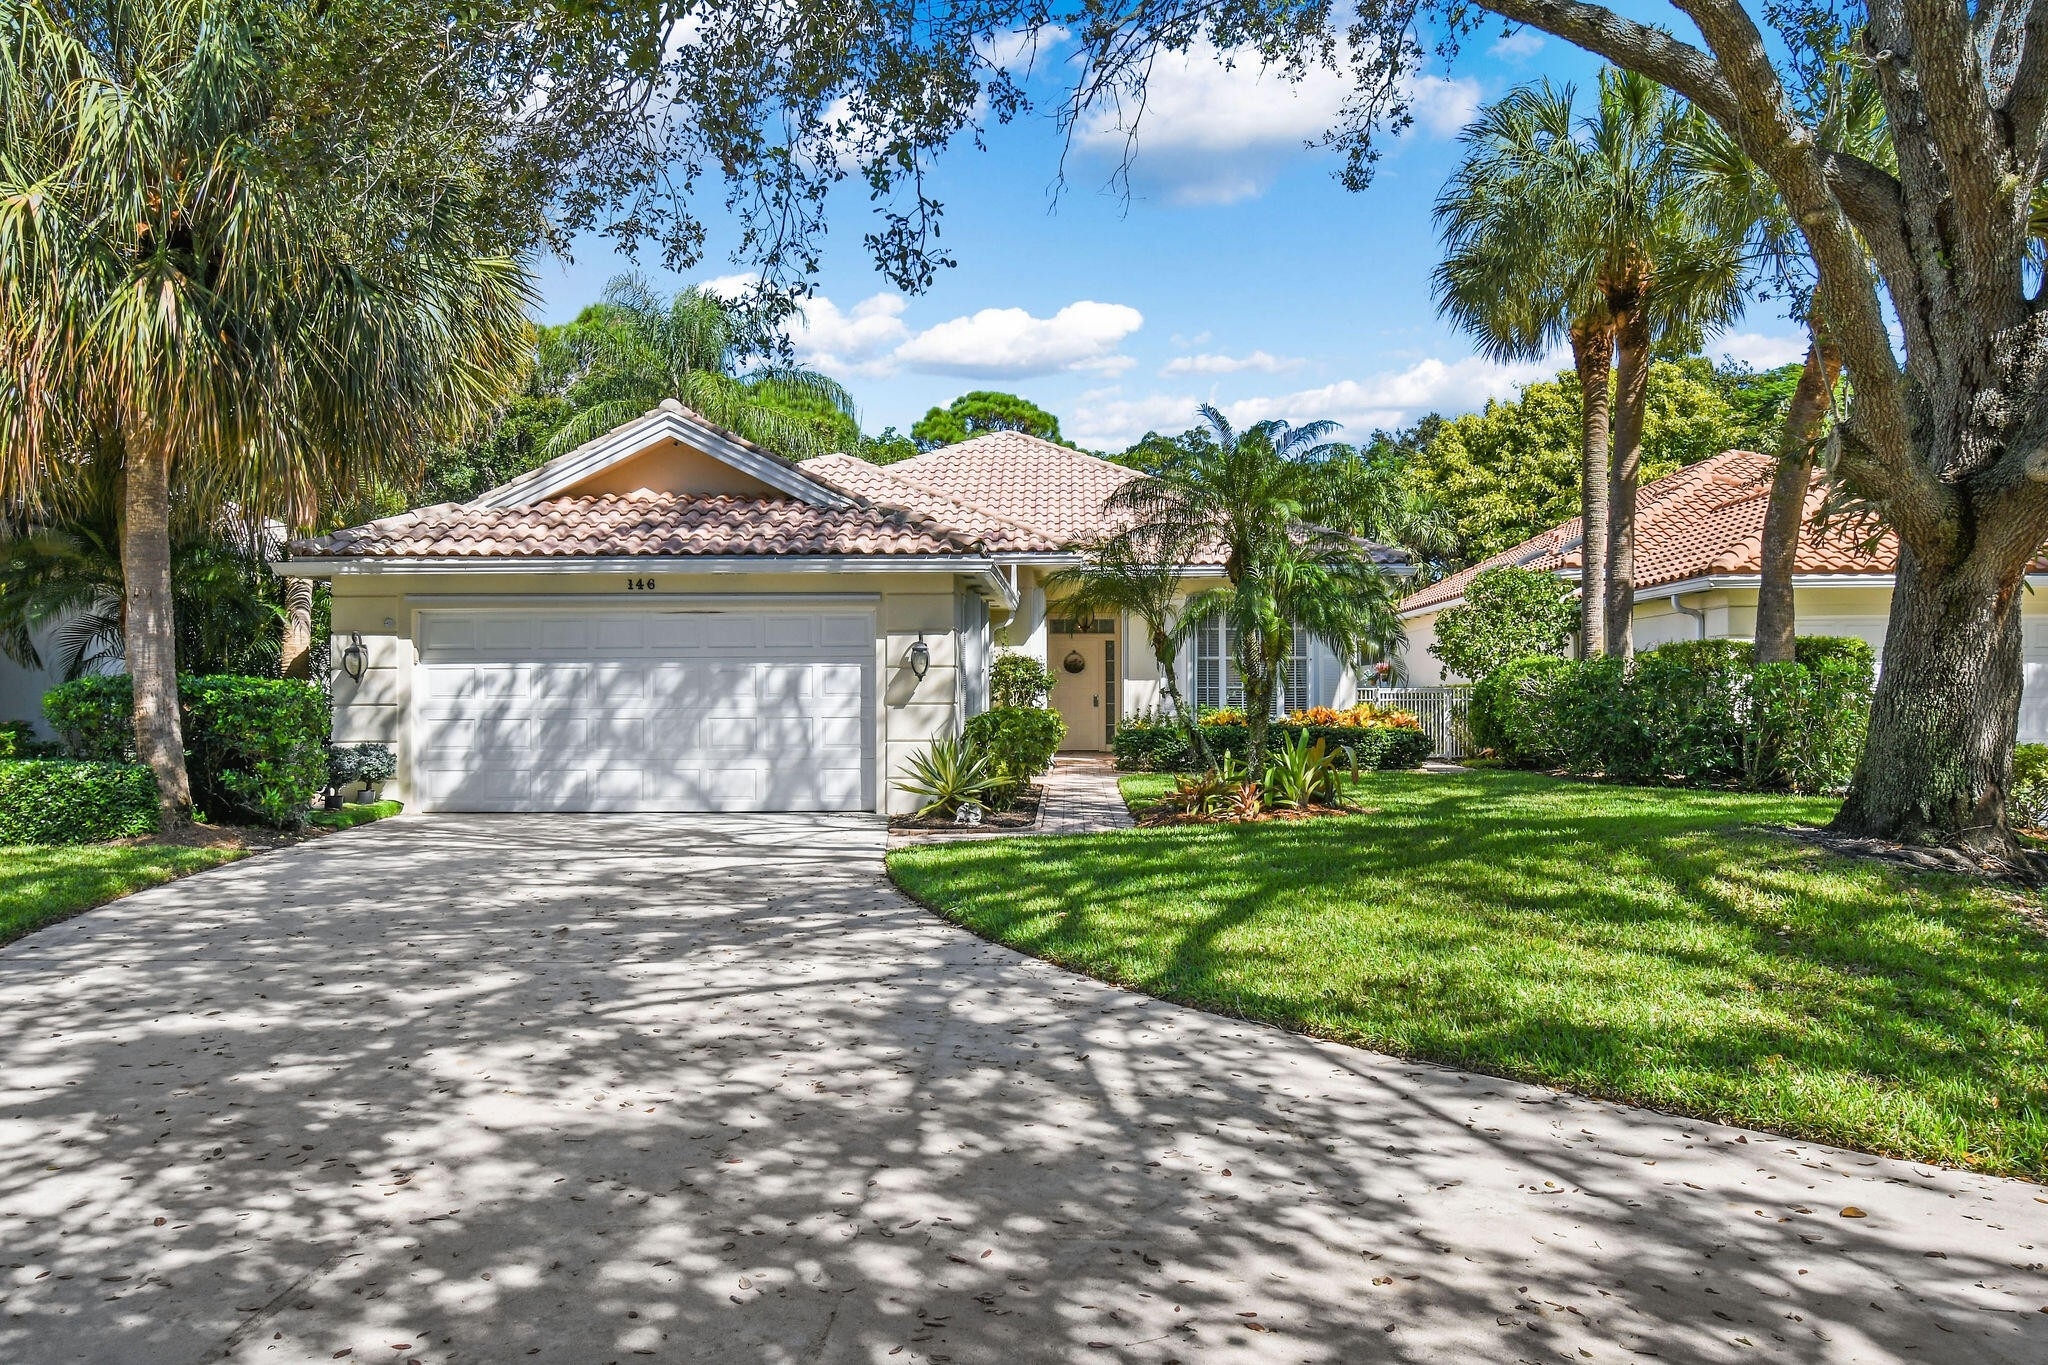 Single Family Home for Sale at Palm Beach Gardens, FL 33410